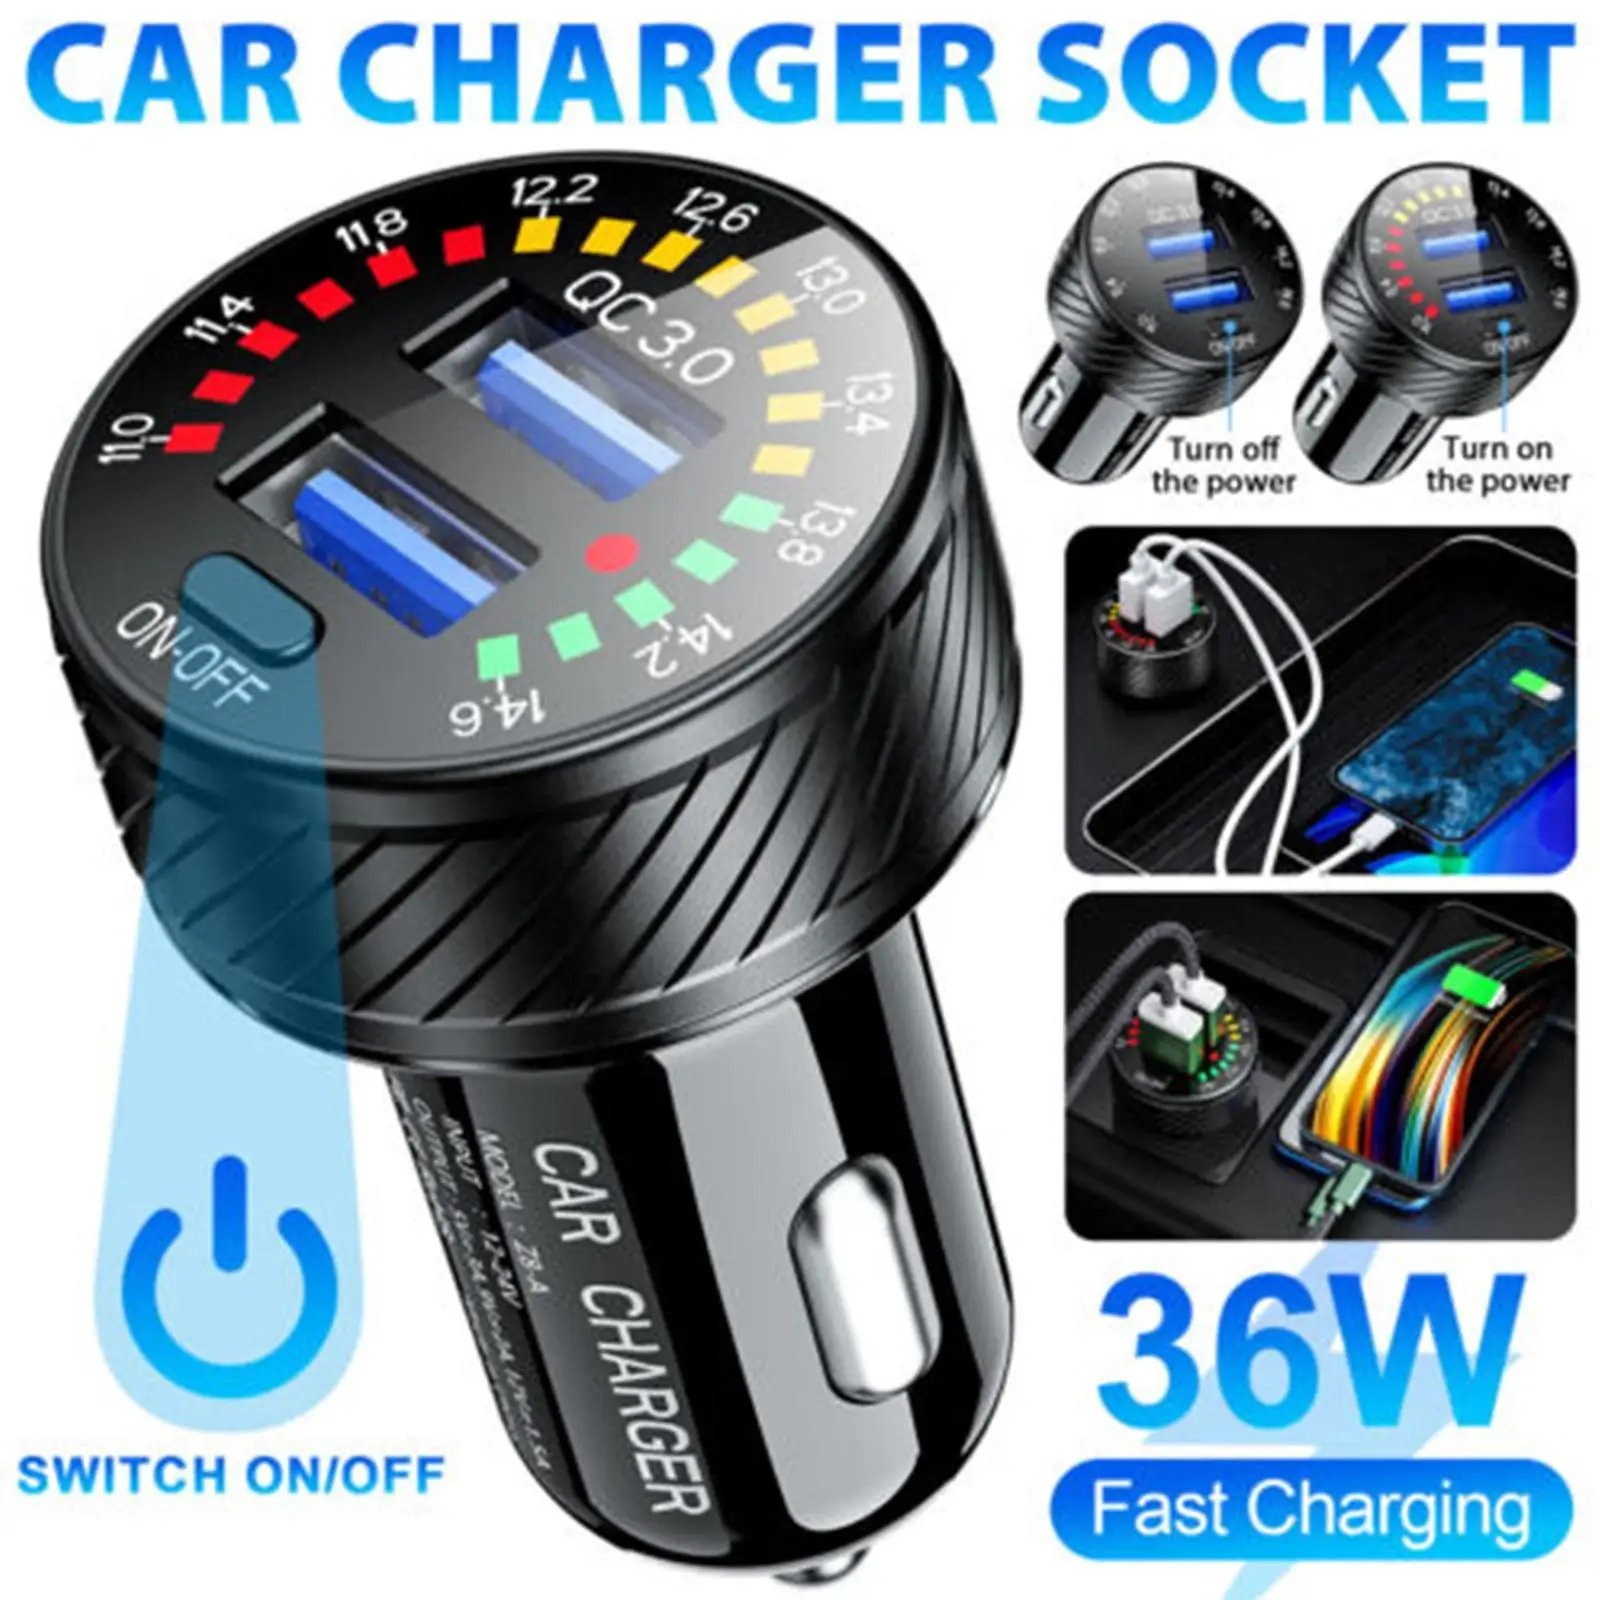 

36W USB Car Charger Dual QC3.0 Quick Charge Cigarette Lighter Adapter Fast Charge Voltmeter Compatible with Mobile Phone Tablet